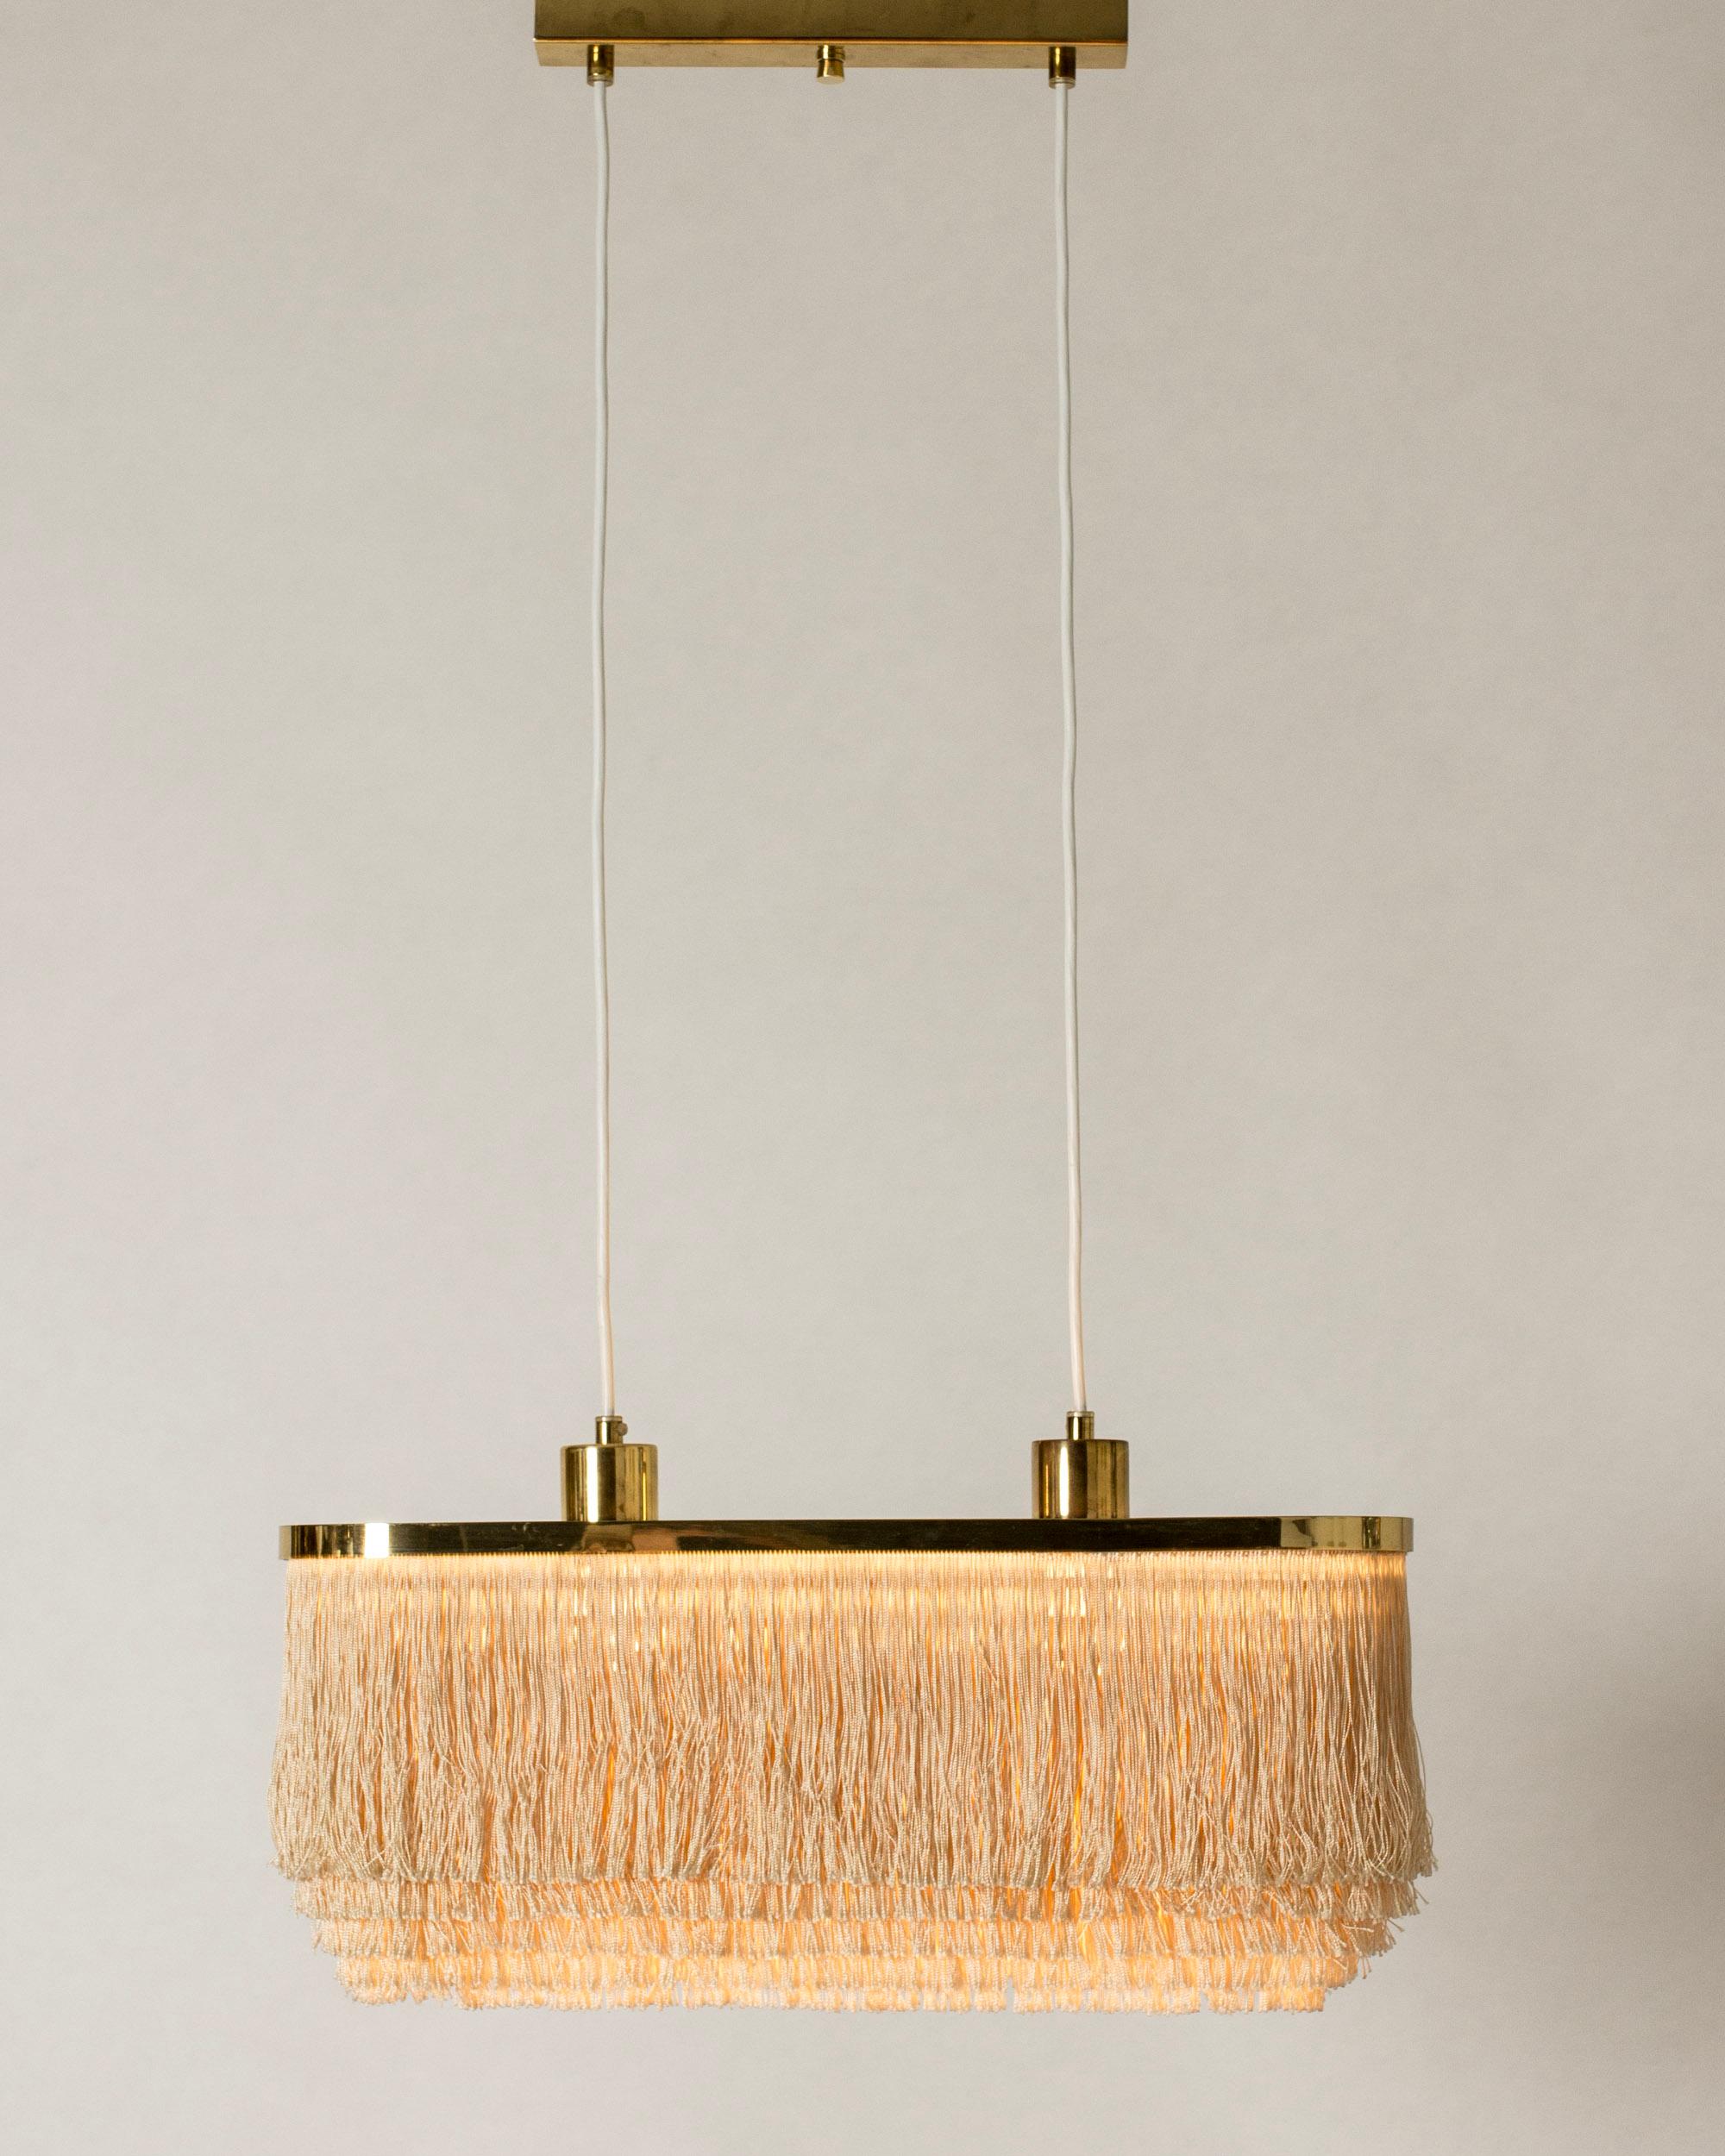 “Fringe” ceiling lamp by Hans-Agne Jakobsson, made with a rectangular brass and plexi glass frame. Drapes of textile chords are suspended in layers from shade. Perfect boudoir lighting.